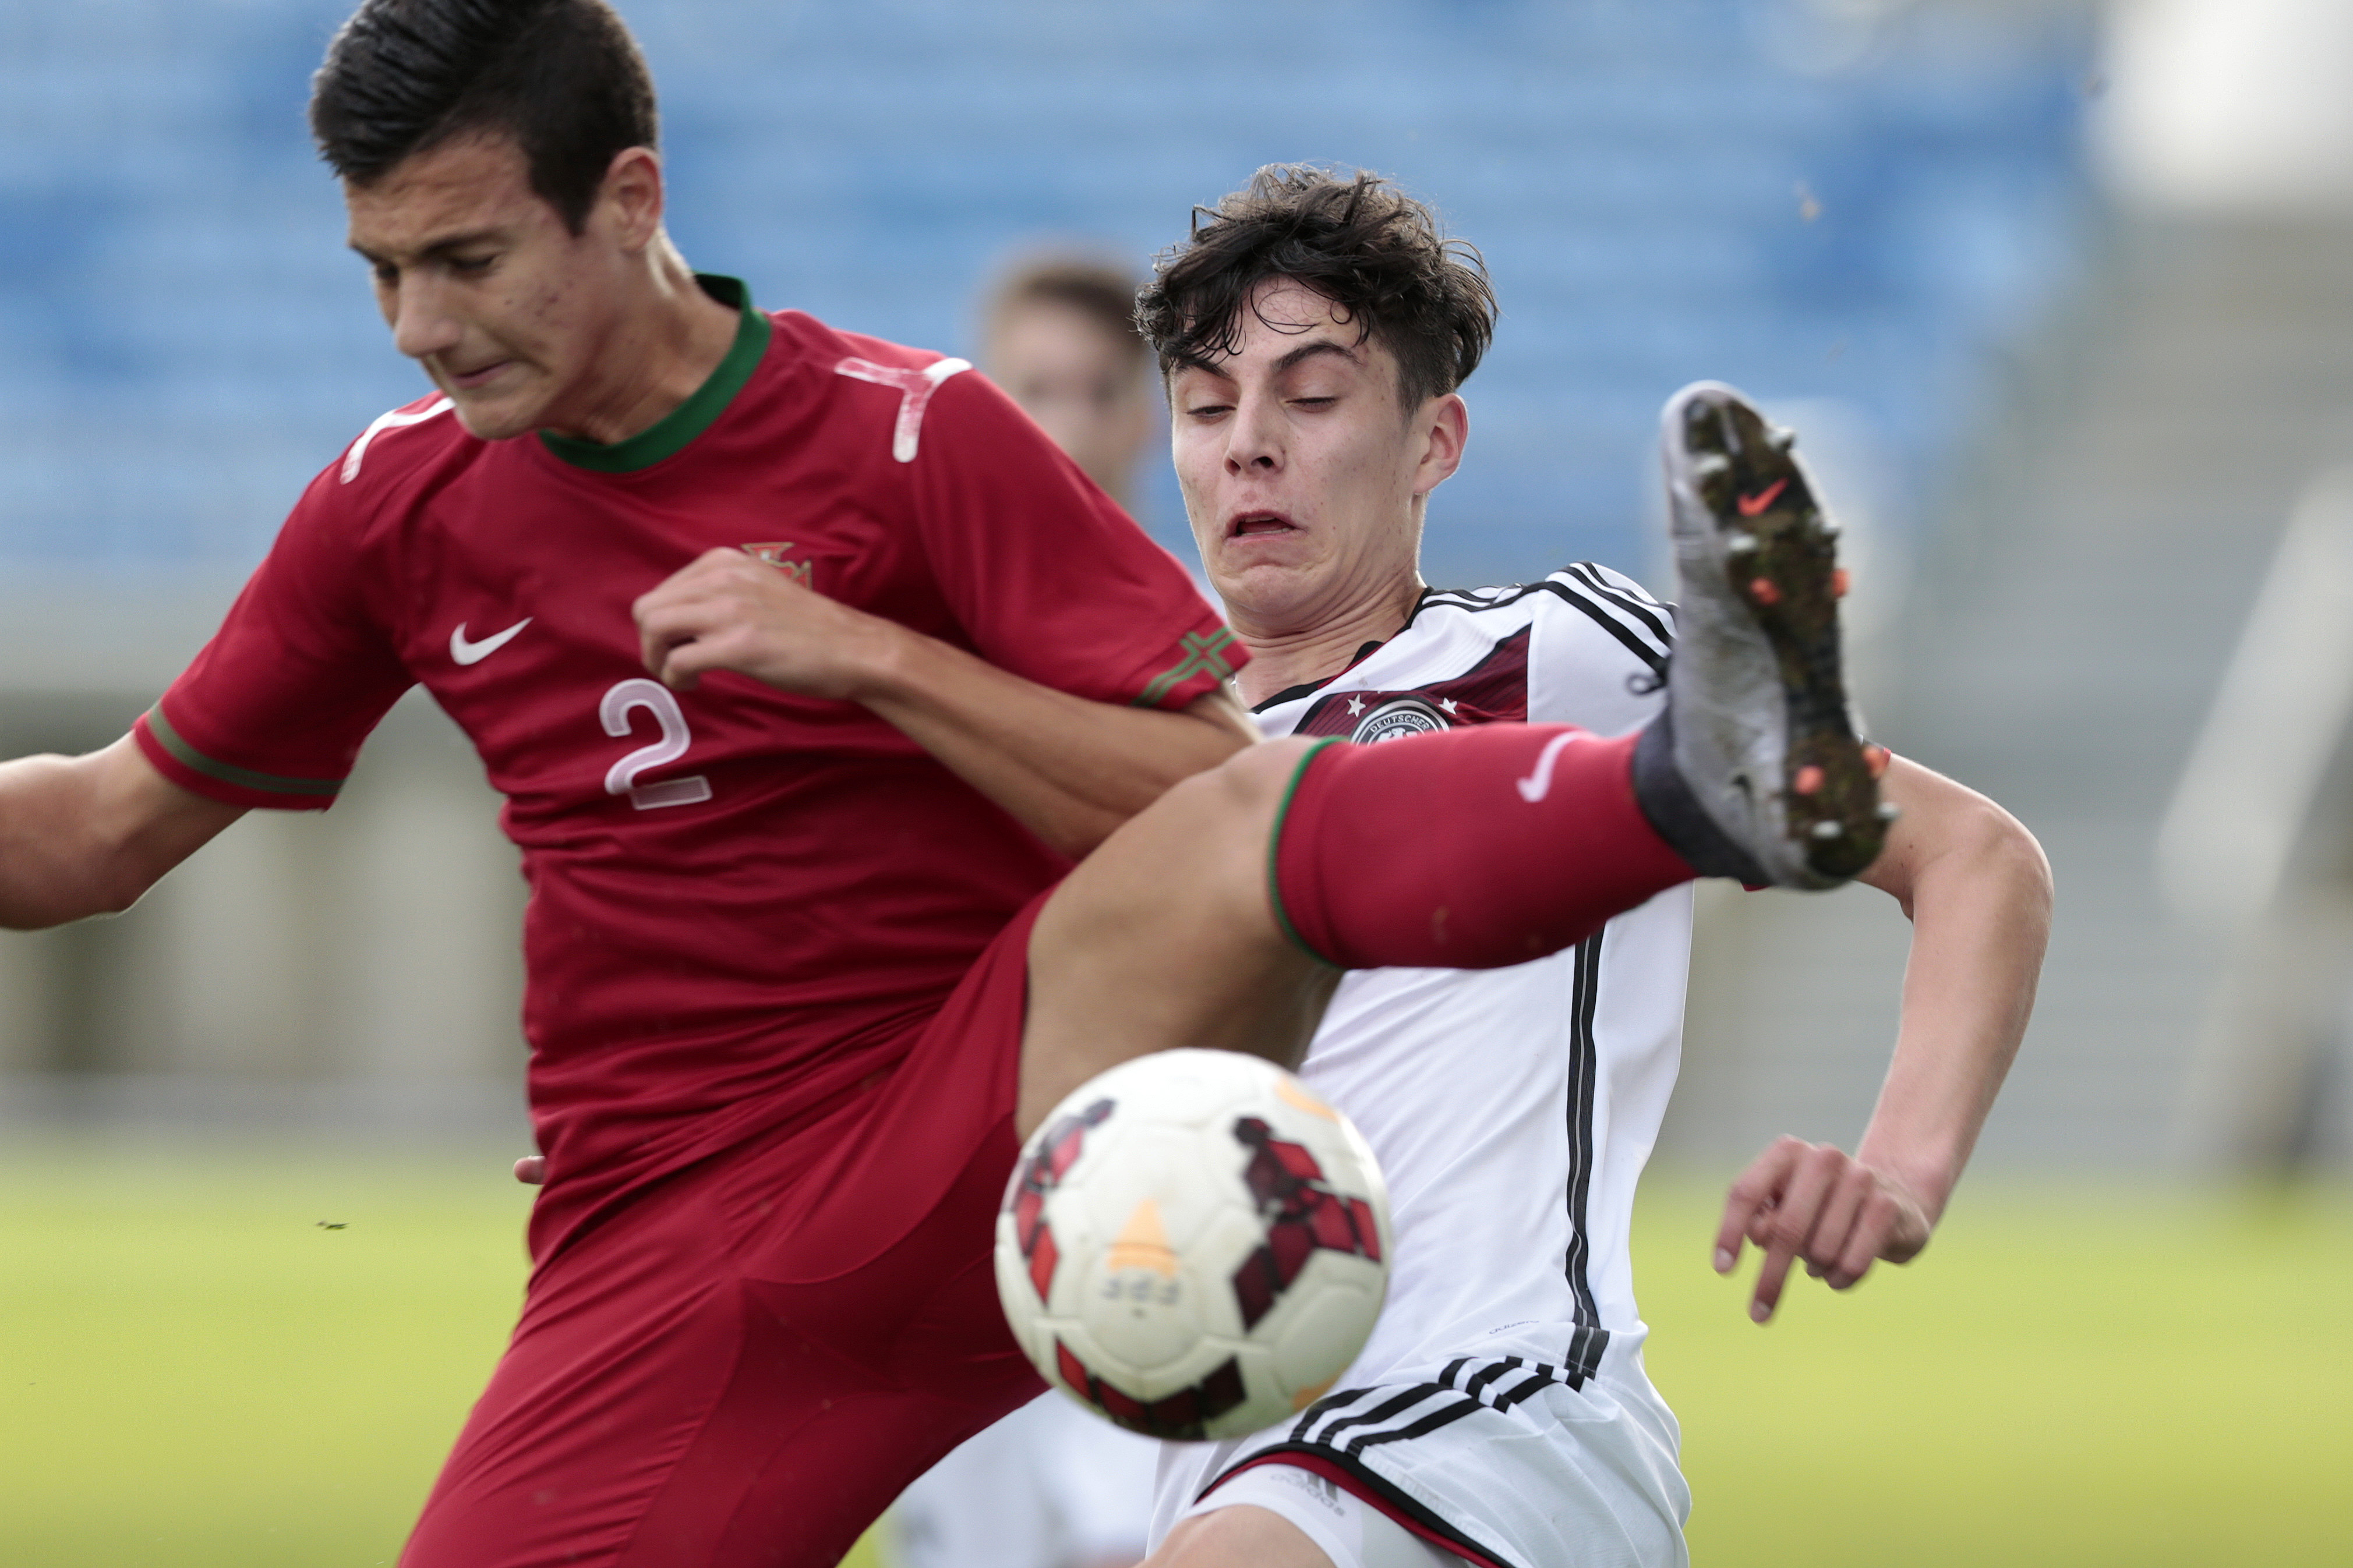 LOULÉ, PORTUGAL - FEBRUARY 9: Diogo Dalot of Portugal challenges Kai Havertz of Germany during the UEFA Under17 match between U17 Portugal v U17 Germany on February 9, 2016 in Estádio Algarve, Loulé, Portugal. (Photo by Filipe Farinha/Bongarts/Getty Images)